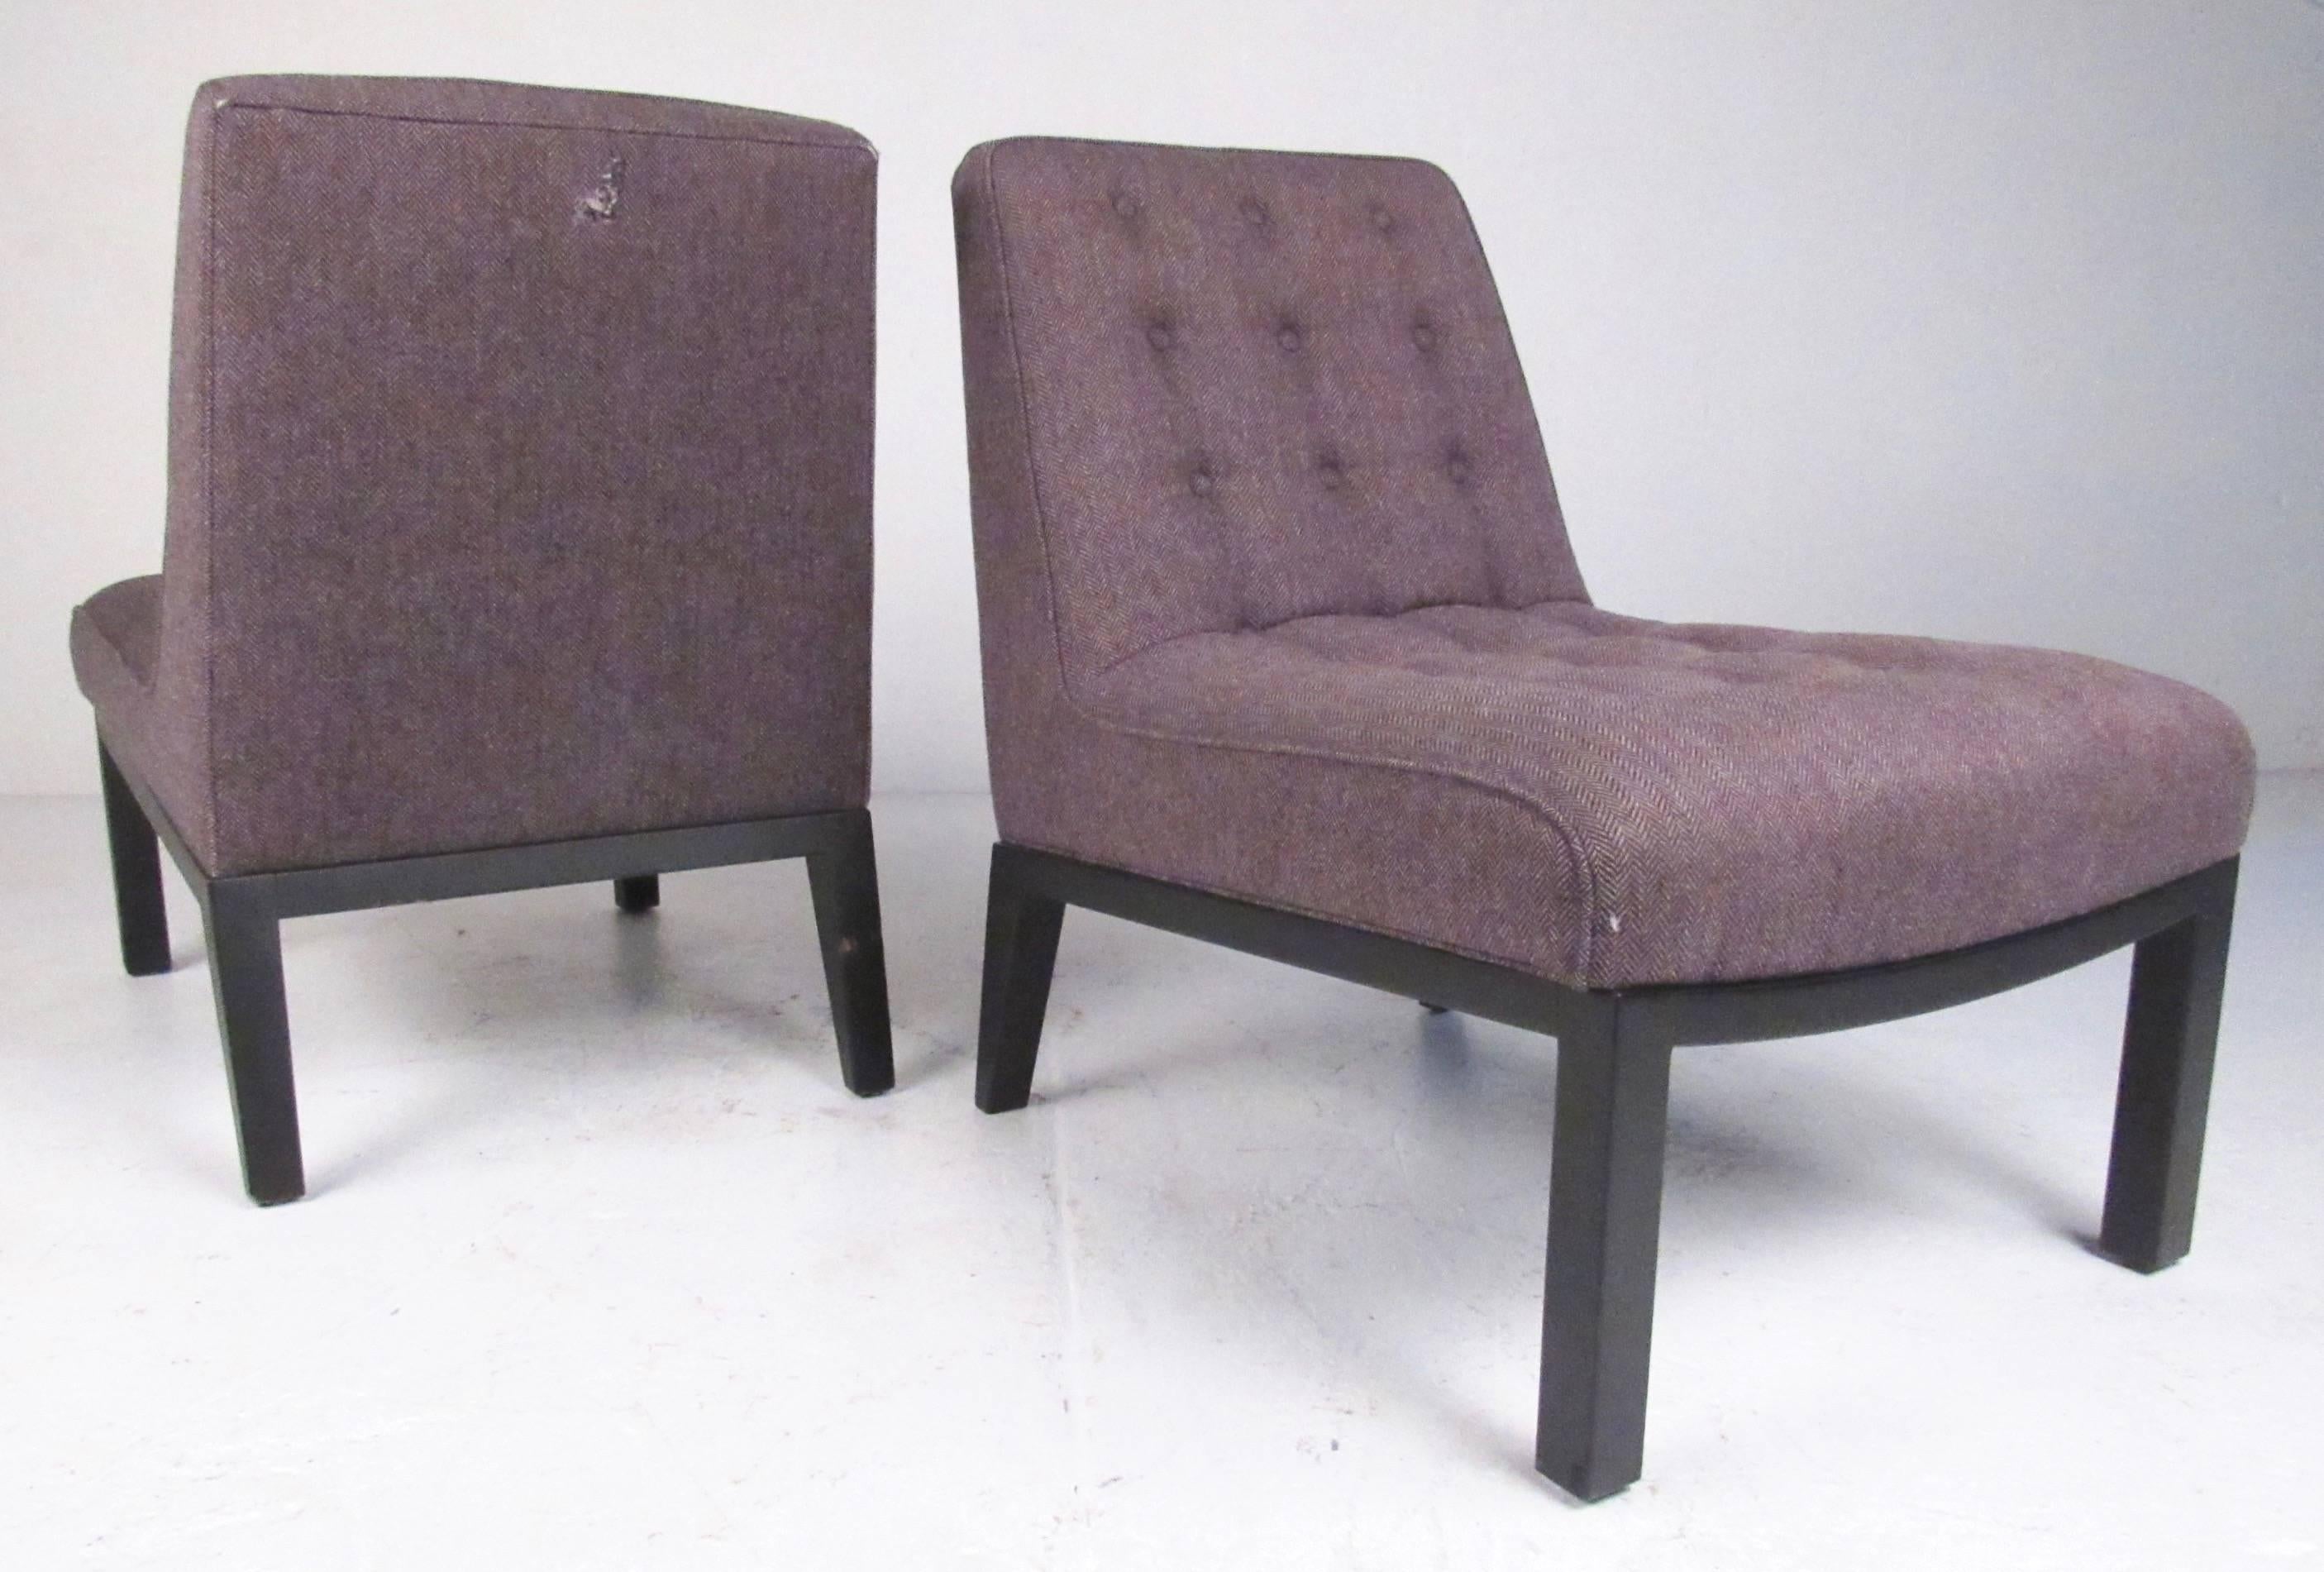 This comfortable pair of Mid-Century slipper chairs feature the iconic design of Edward Wormley for Dunbar. Vintage fabric on simple modern frames make an impressive addition to home or office seating areas. 
Please confirm item location (NY or NJ).